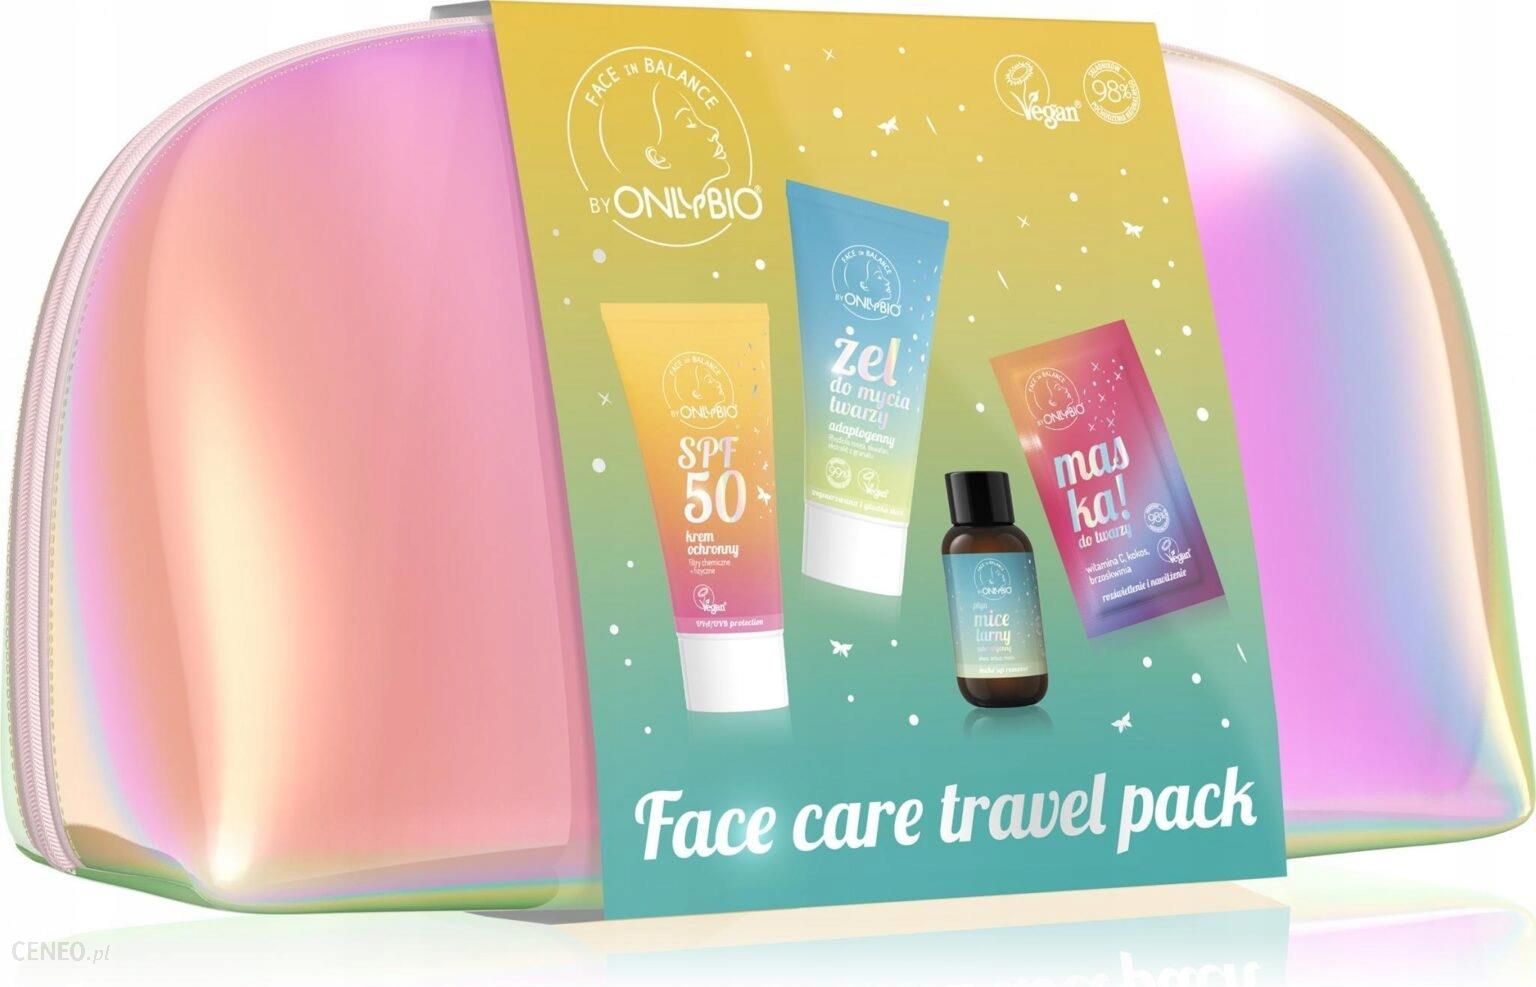 face care travel pack by onlybio spf 50